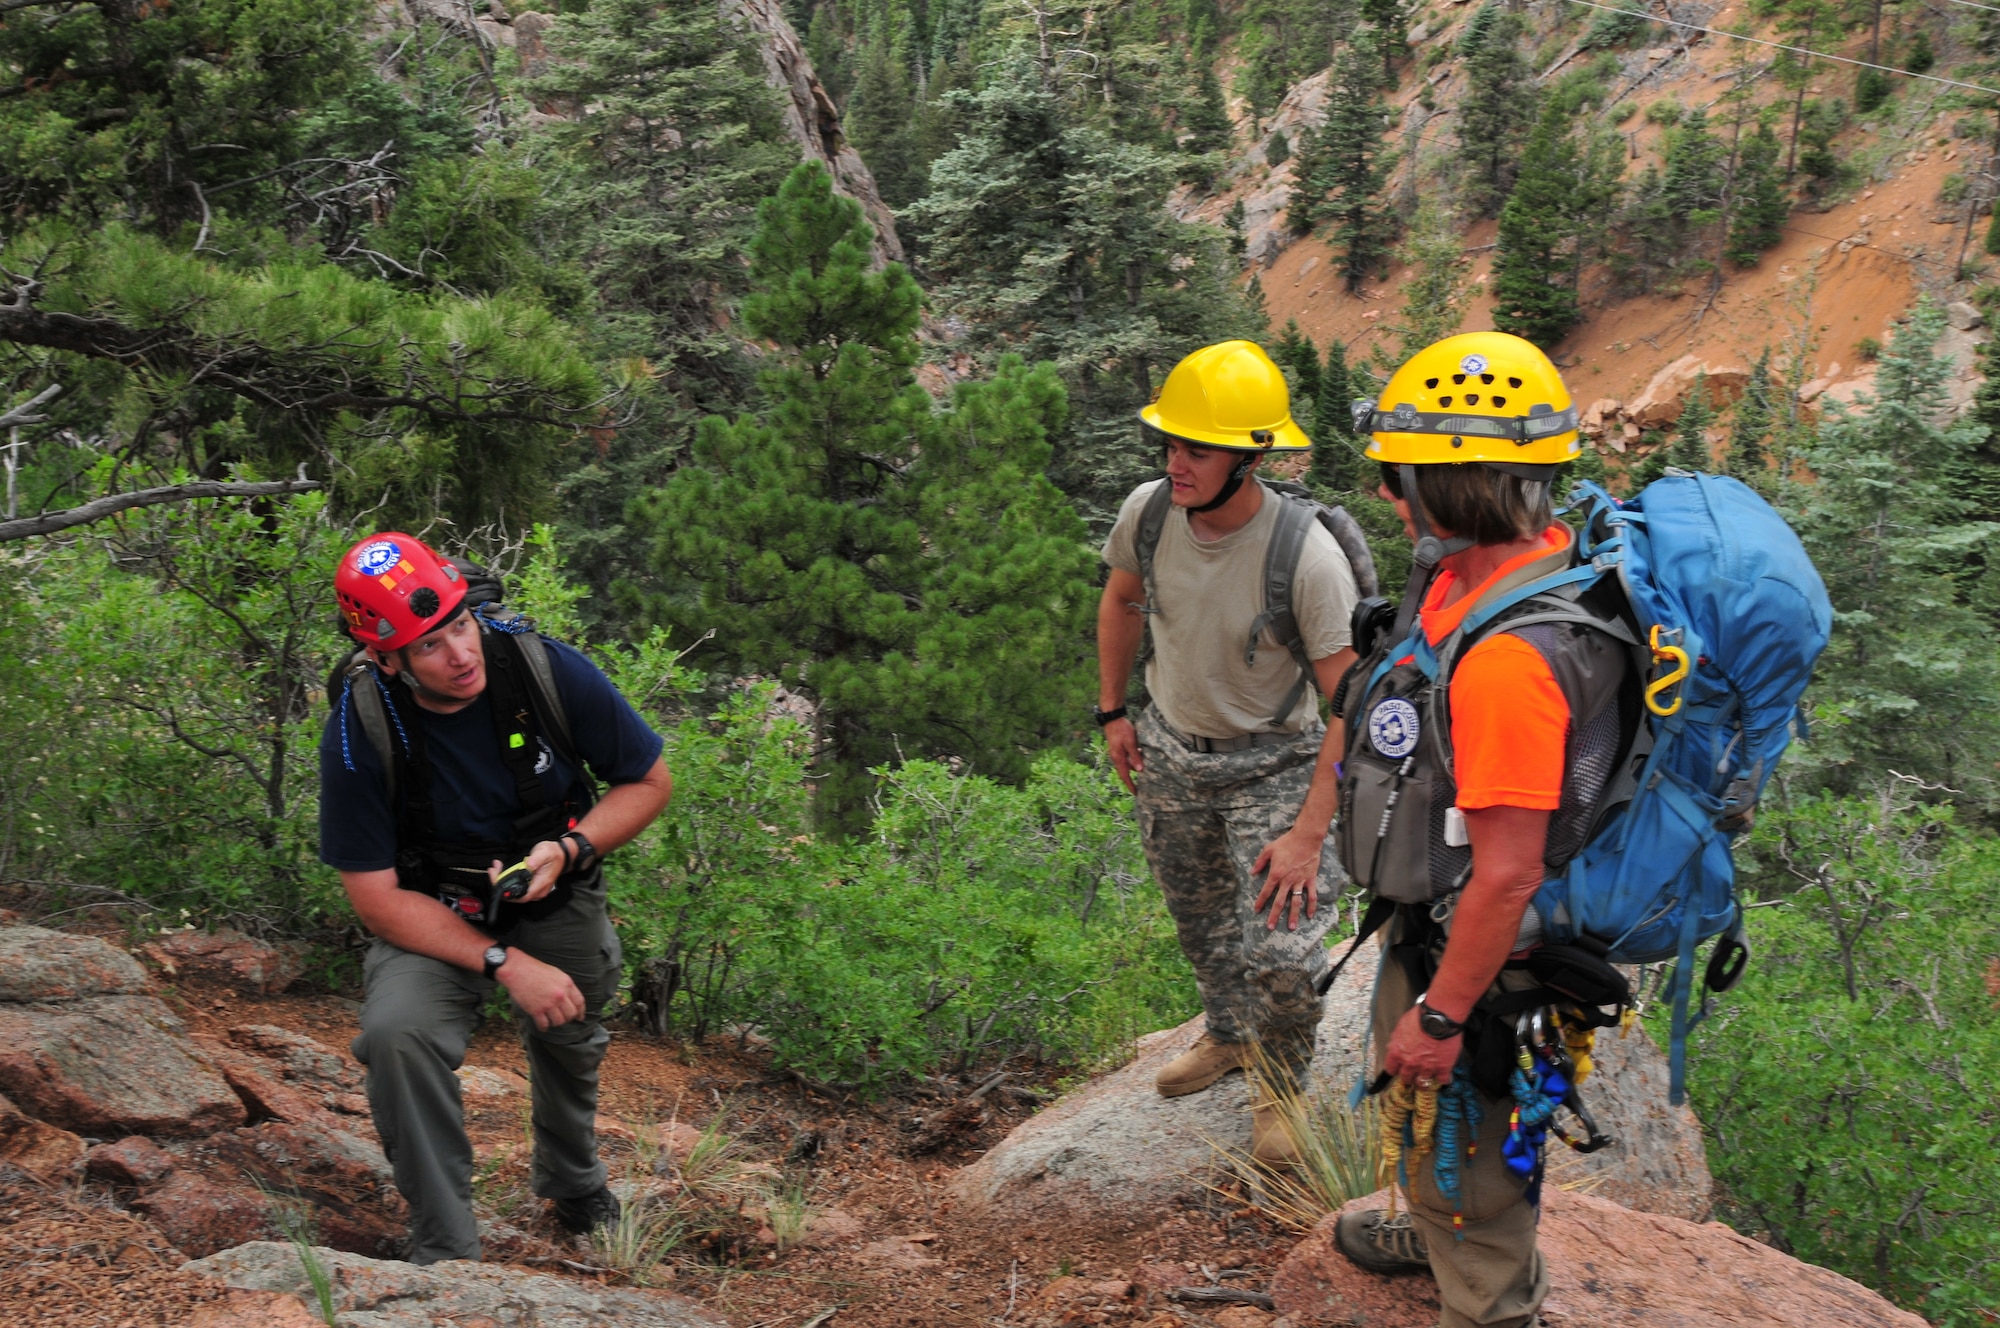 El Paso County Search and Rescue member Eric Babcock (left) talks with fellow team members Patty Baxter (right) and U.S. Army Staff Sgt. Matthew Wimmer, 1157th Engineer Firefighting Company, Colorado National Guard, while performing a simulated search and rescue mission at the U.S. Air Force Academy in Colo. Springs, Colo., during a Vigilant Guard exercise, July 22, 2013. The Vigilant Guard exercise is a weeklong exercise full of scenarios based on wildfires, tornadoes, air craft accidents, hazmat response, search and rescue, triage, medevac and other emergency-response measures. The training and experience gained from this exercise will provide the Colorado National Guard and supporting military units an opportunity to improve cooperation and operational relationships with their local, state, private sector, non-governmental organizations and federal partners. (U.S. Air National Guard photo by Tech. Sgt. Wolfram M. Stumpf)